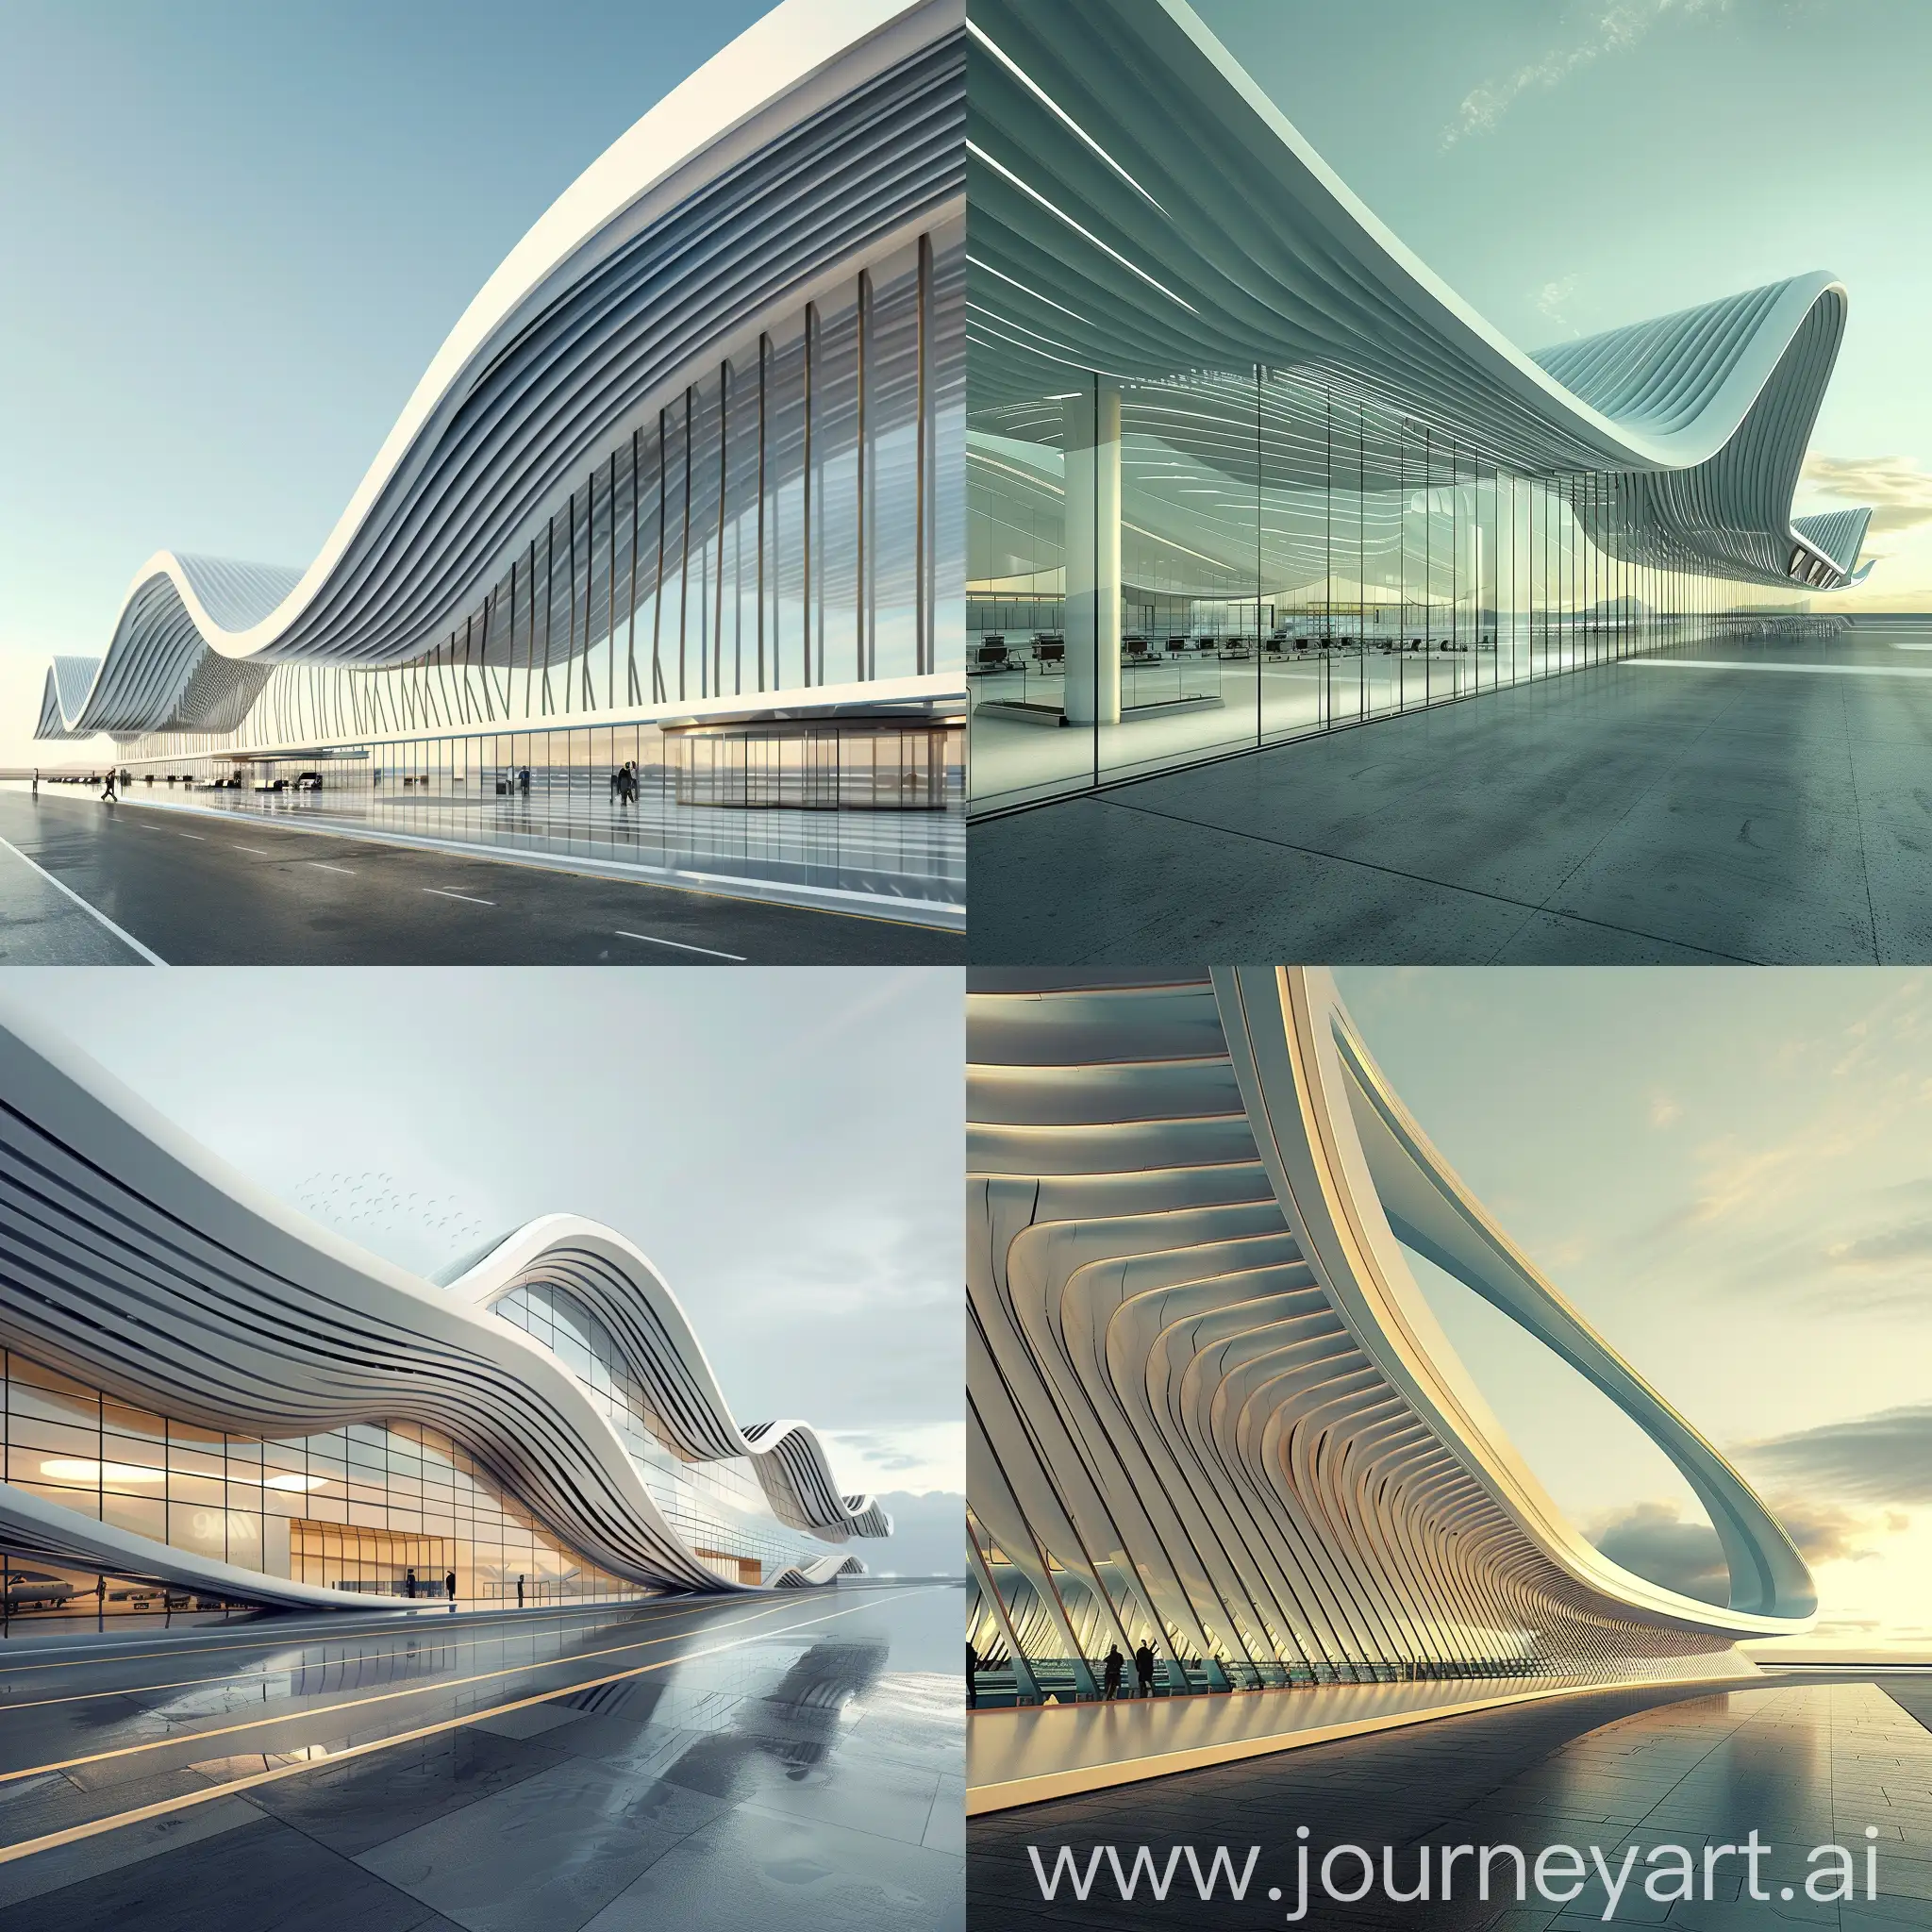 A futuristic airport terminal, with a linear design that mimics the gentle curves of ocean waves. The parametric facade adds a touch of modernity to the overall structure.